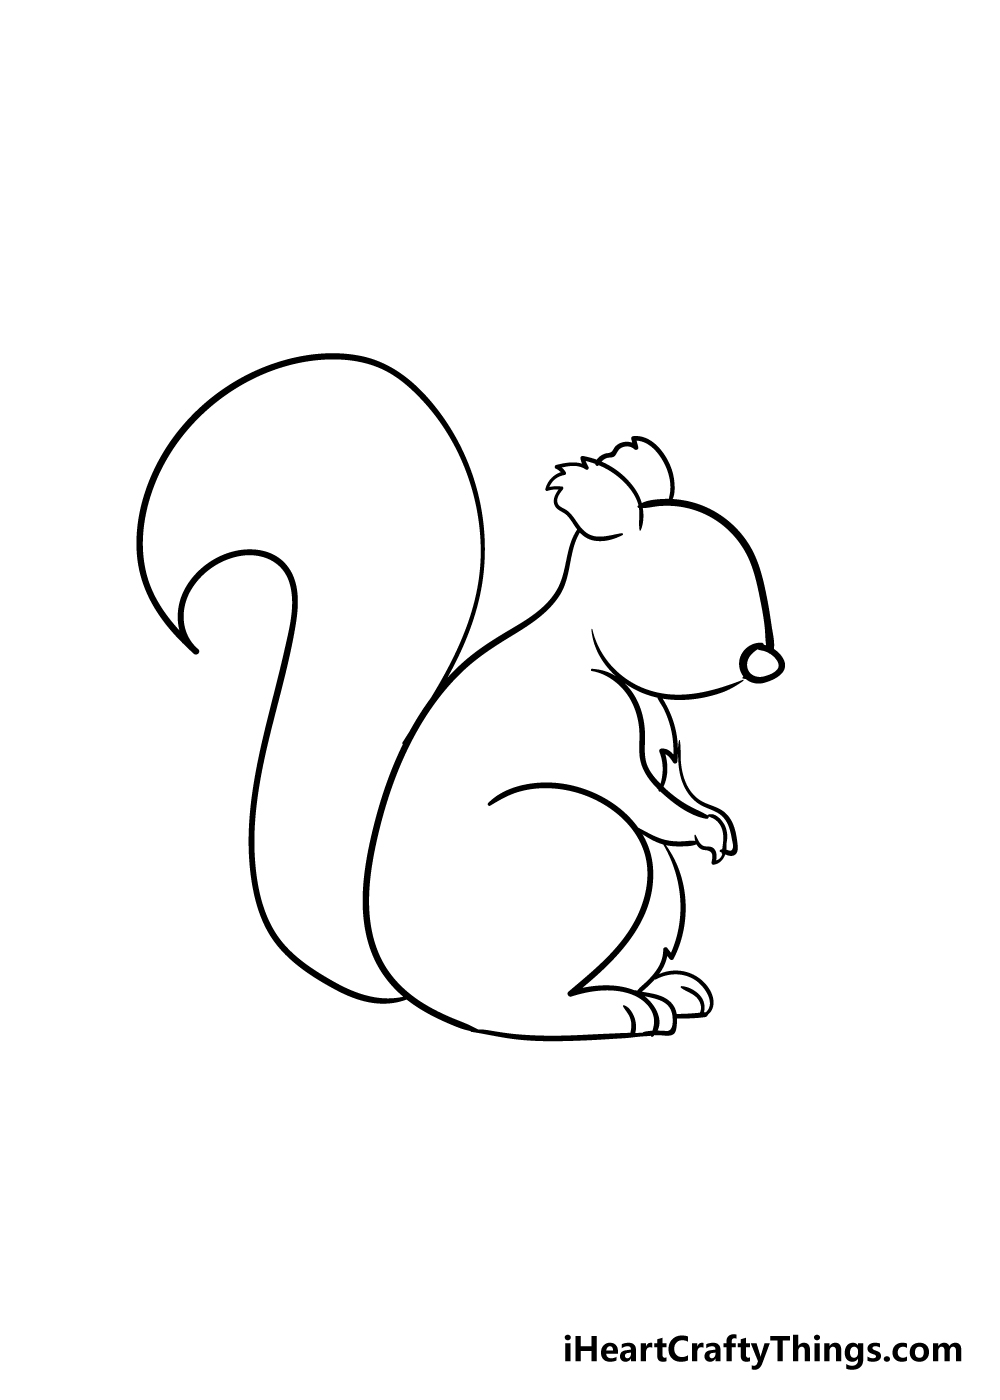 squirrel drawing step 4